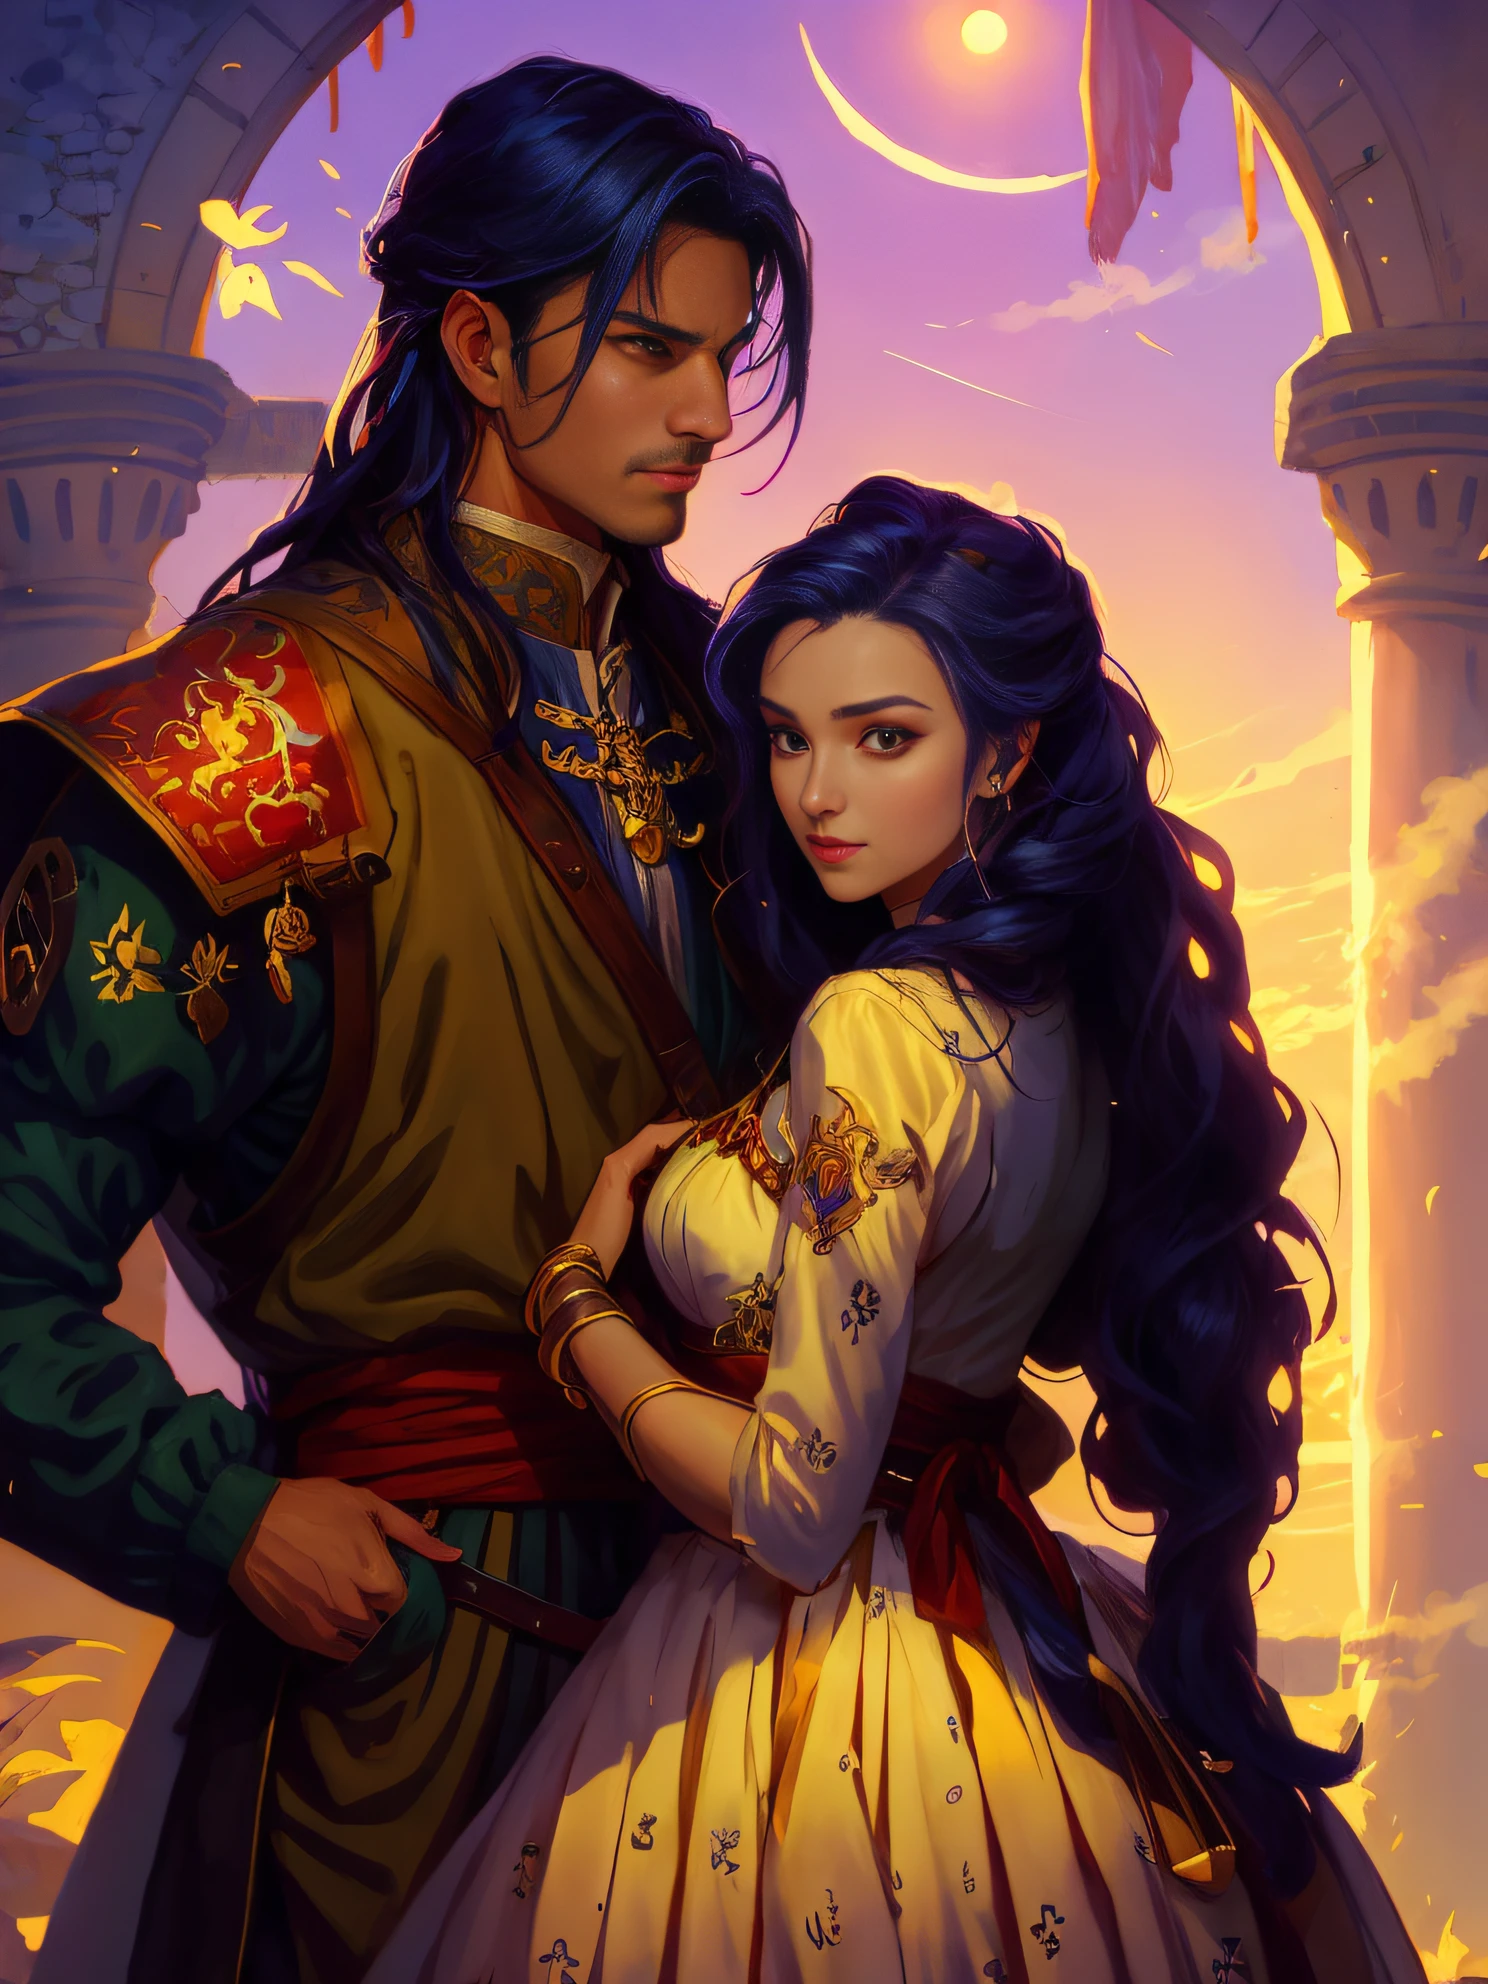 arafed image of a couple dressed in medieval clothing standing in front of a castle, wlop and sakimichan, artwork in the style of guweiz, by Yang J, fantasy art style, beautiful character painting, sakimichan and frank franzzeta, fantasy style art, guweiz, highly detailed exquisite fanart, magali villeneuve'